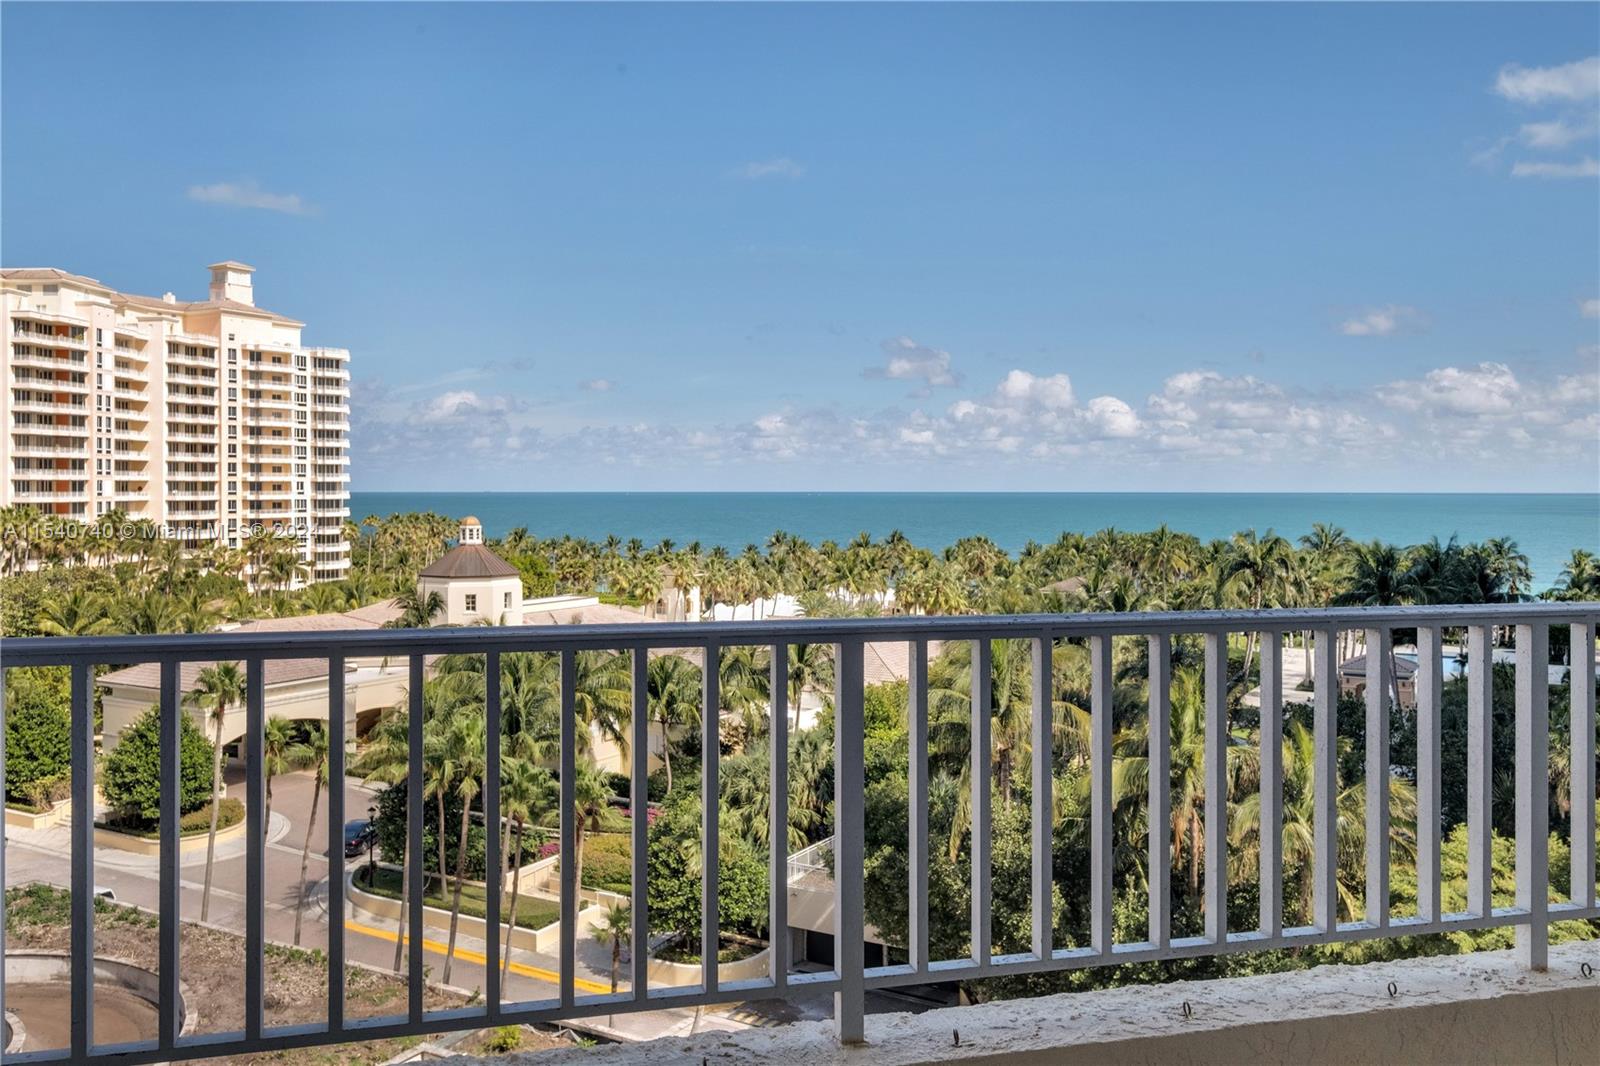 Enjoy our paradise found in this spacious oceanfront condo at the Ocean Club 5-star resort complex in Key Biscayne. Amazing views of the beach and sunset from this updated and spacious 3 bedrooms, 4 baths unit at Club Tower One. Coveted flow-thru floor plan with two large terraces, one facing the ocean, the other facing the bay. Numerous amenities include direct beach access, pools, gym, tennis courts, clubhouse, spa, children's playground and dining options on site. Two assigned parking spaces (#506 and #711), valet parking, 24-hour concierge, gatehouse and security.